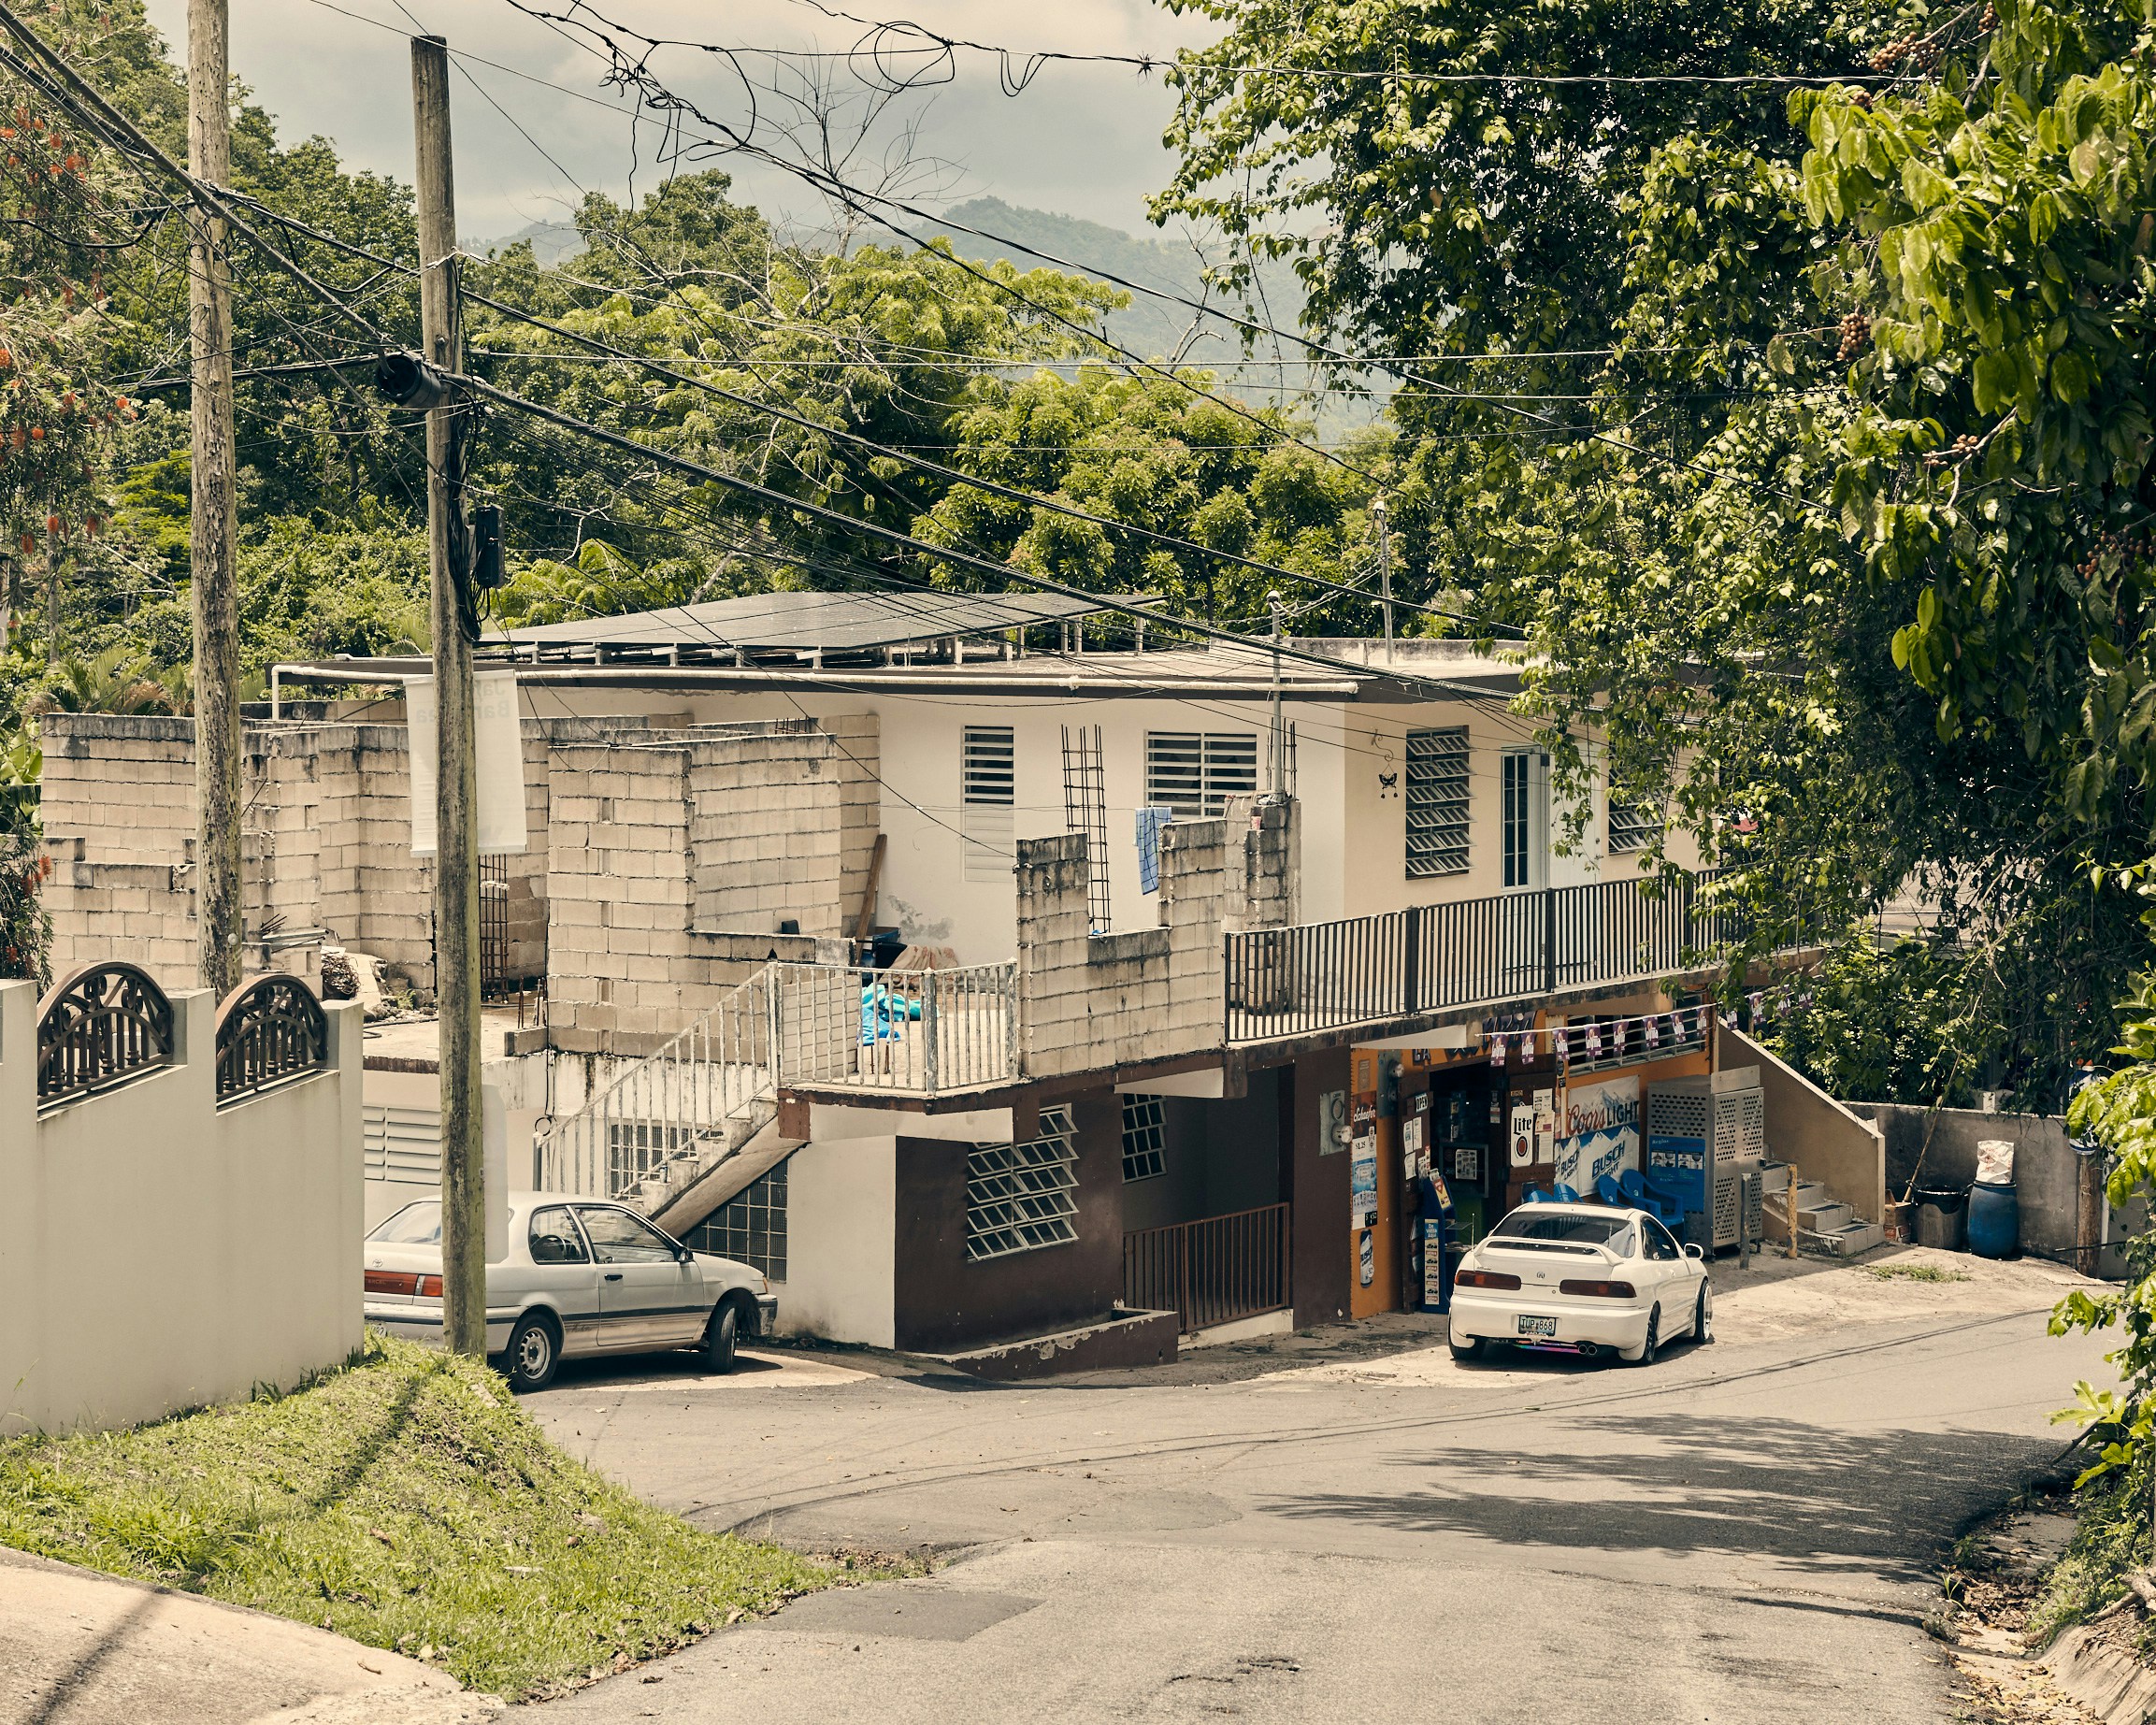 Adjuntas, Puerto Rico - 8/8/19: A bodega powered by solar power installed by Casa Pueblo.CREDIT: Christopher Gregory for The Intercept